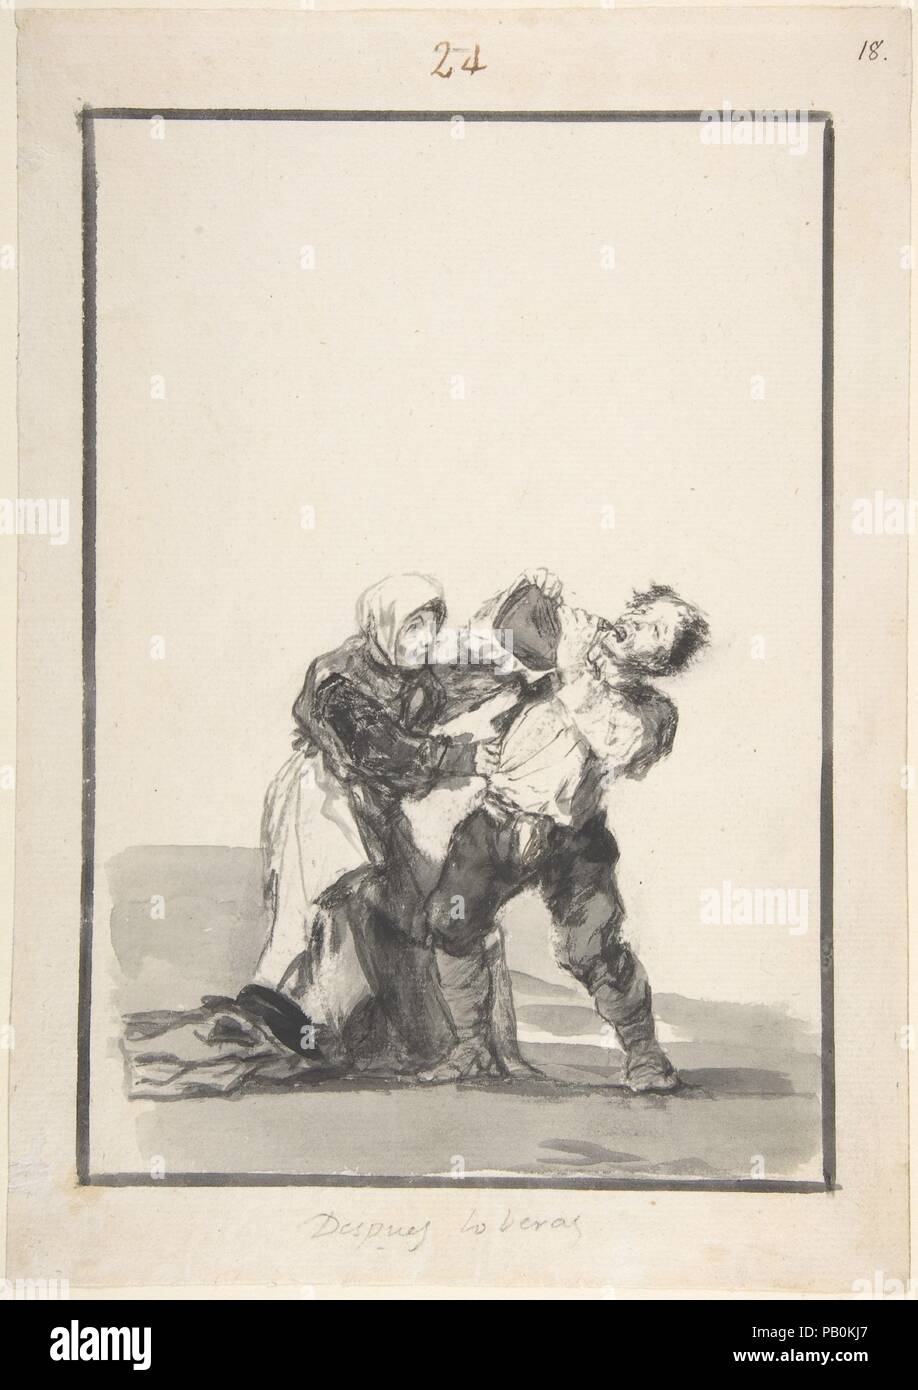 'You'll See Later'; a man drinking, a woman trying to stop him; folio 24 from the Black Border Album 'E'. Artist: Goya (Francisco de Goya y Lucientes) (Spanish, Fuendetodos 1746-1828 Bordeaux). Dimensions: Sheet: 10 1/2 × 7 3/8 in. (26.7 × 18.8 cm). Date: ca.1816-20. Museum: Metropolitan Museum of Art, New York, USA. Stock Photo